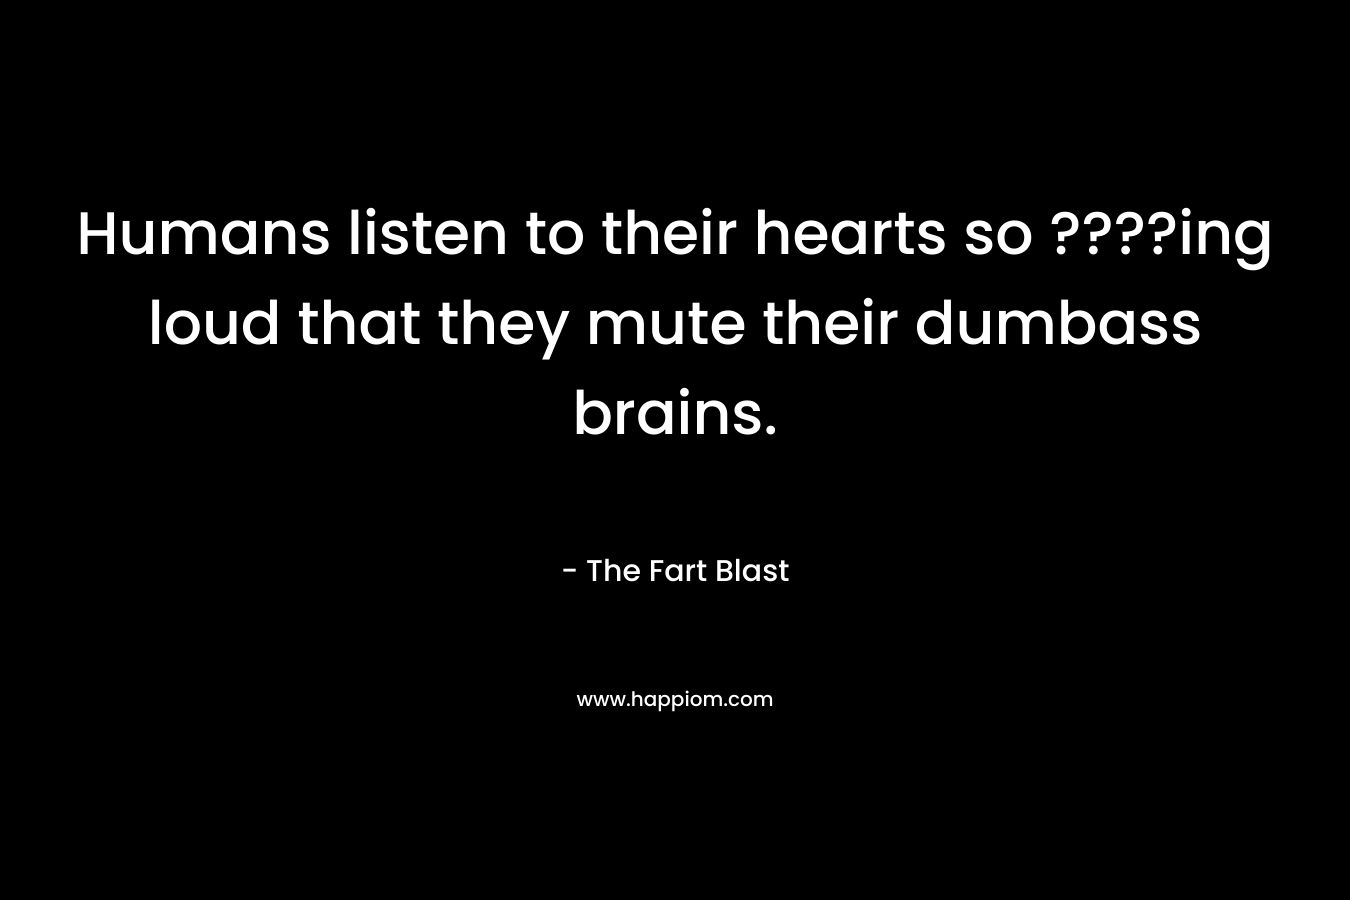 Humans listen to their hearts so ????ing loud that they mute their dumbass brains. – The Fart Blast